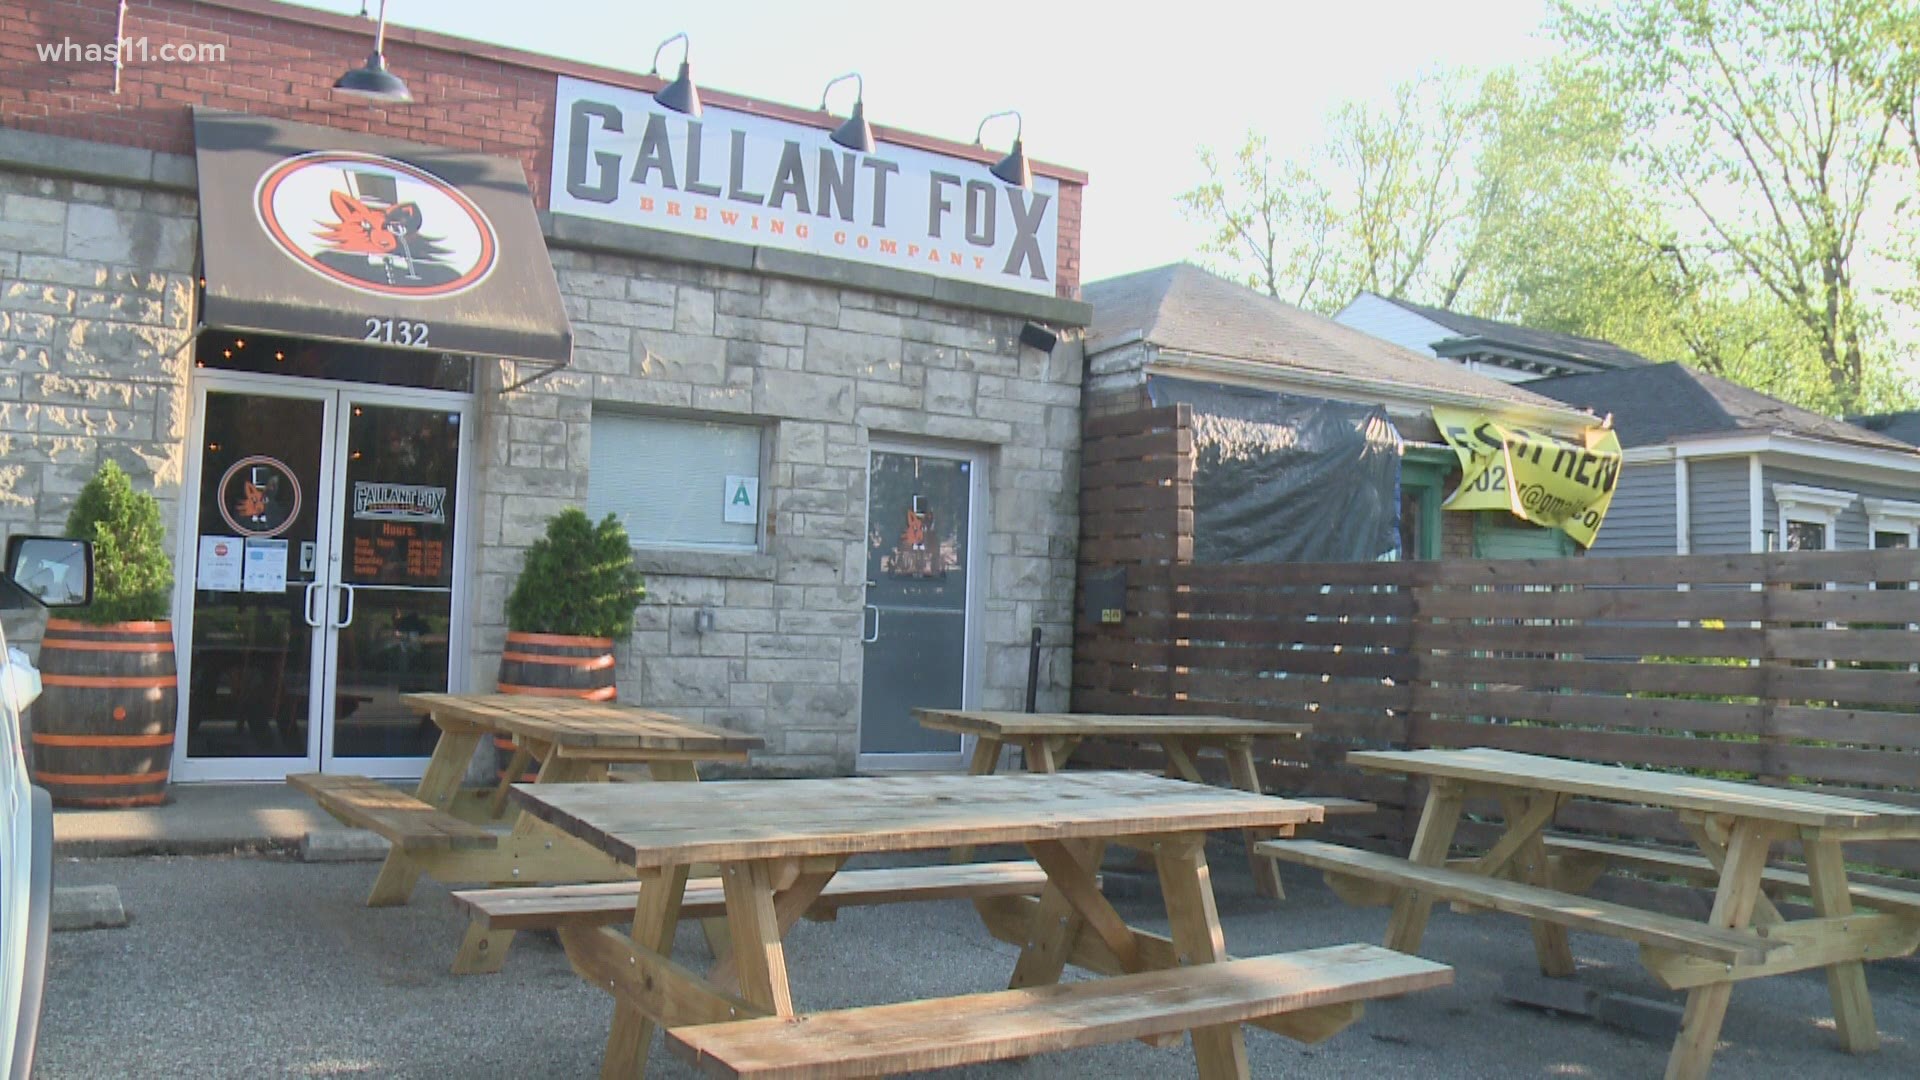 A year after opening in Louisville, a popular brewery is expanding into Bullitt County.